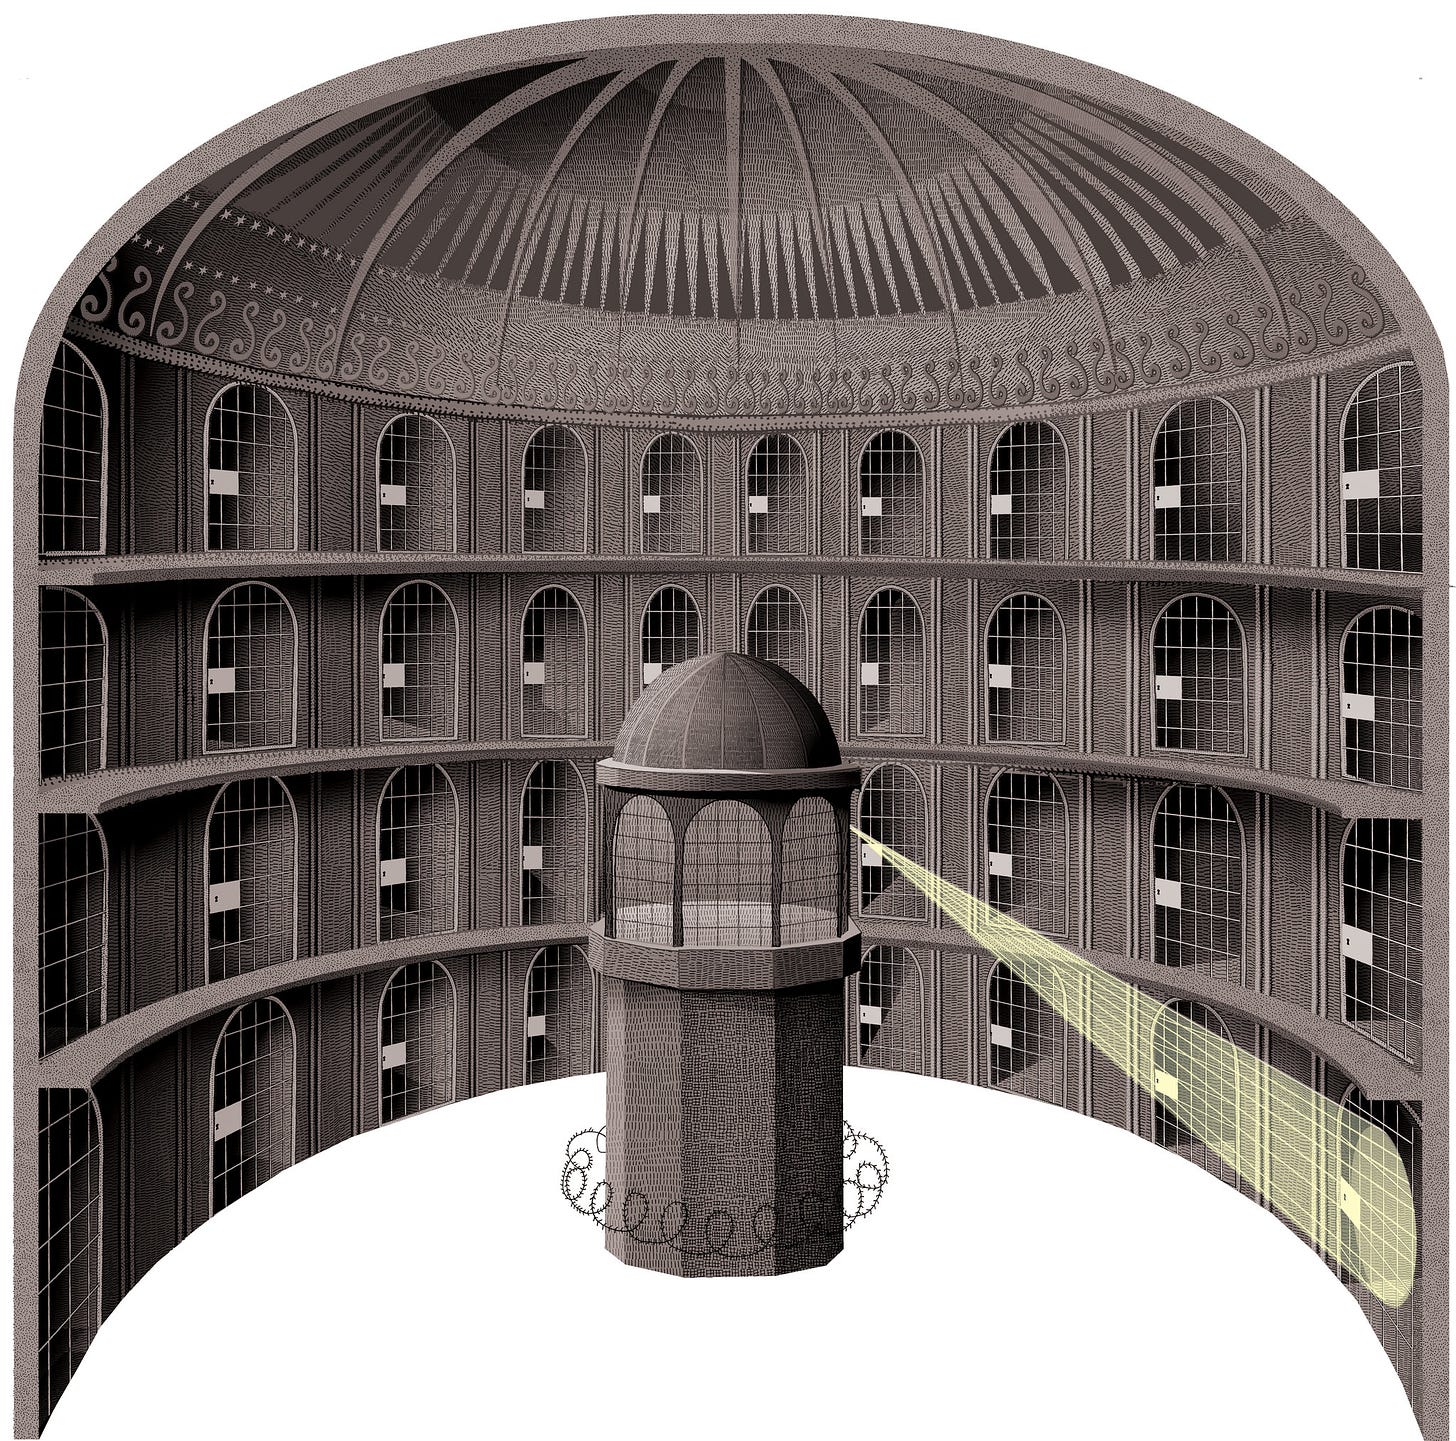 The Panopticon,' by Jenni Fagan - The New York Times